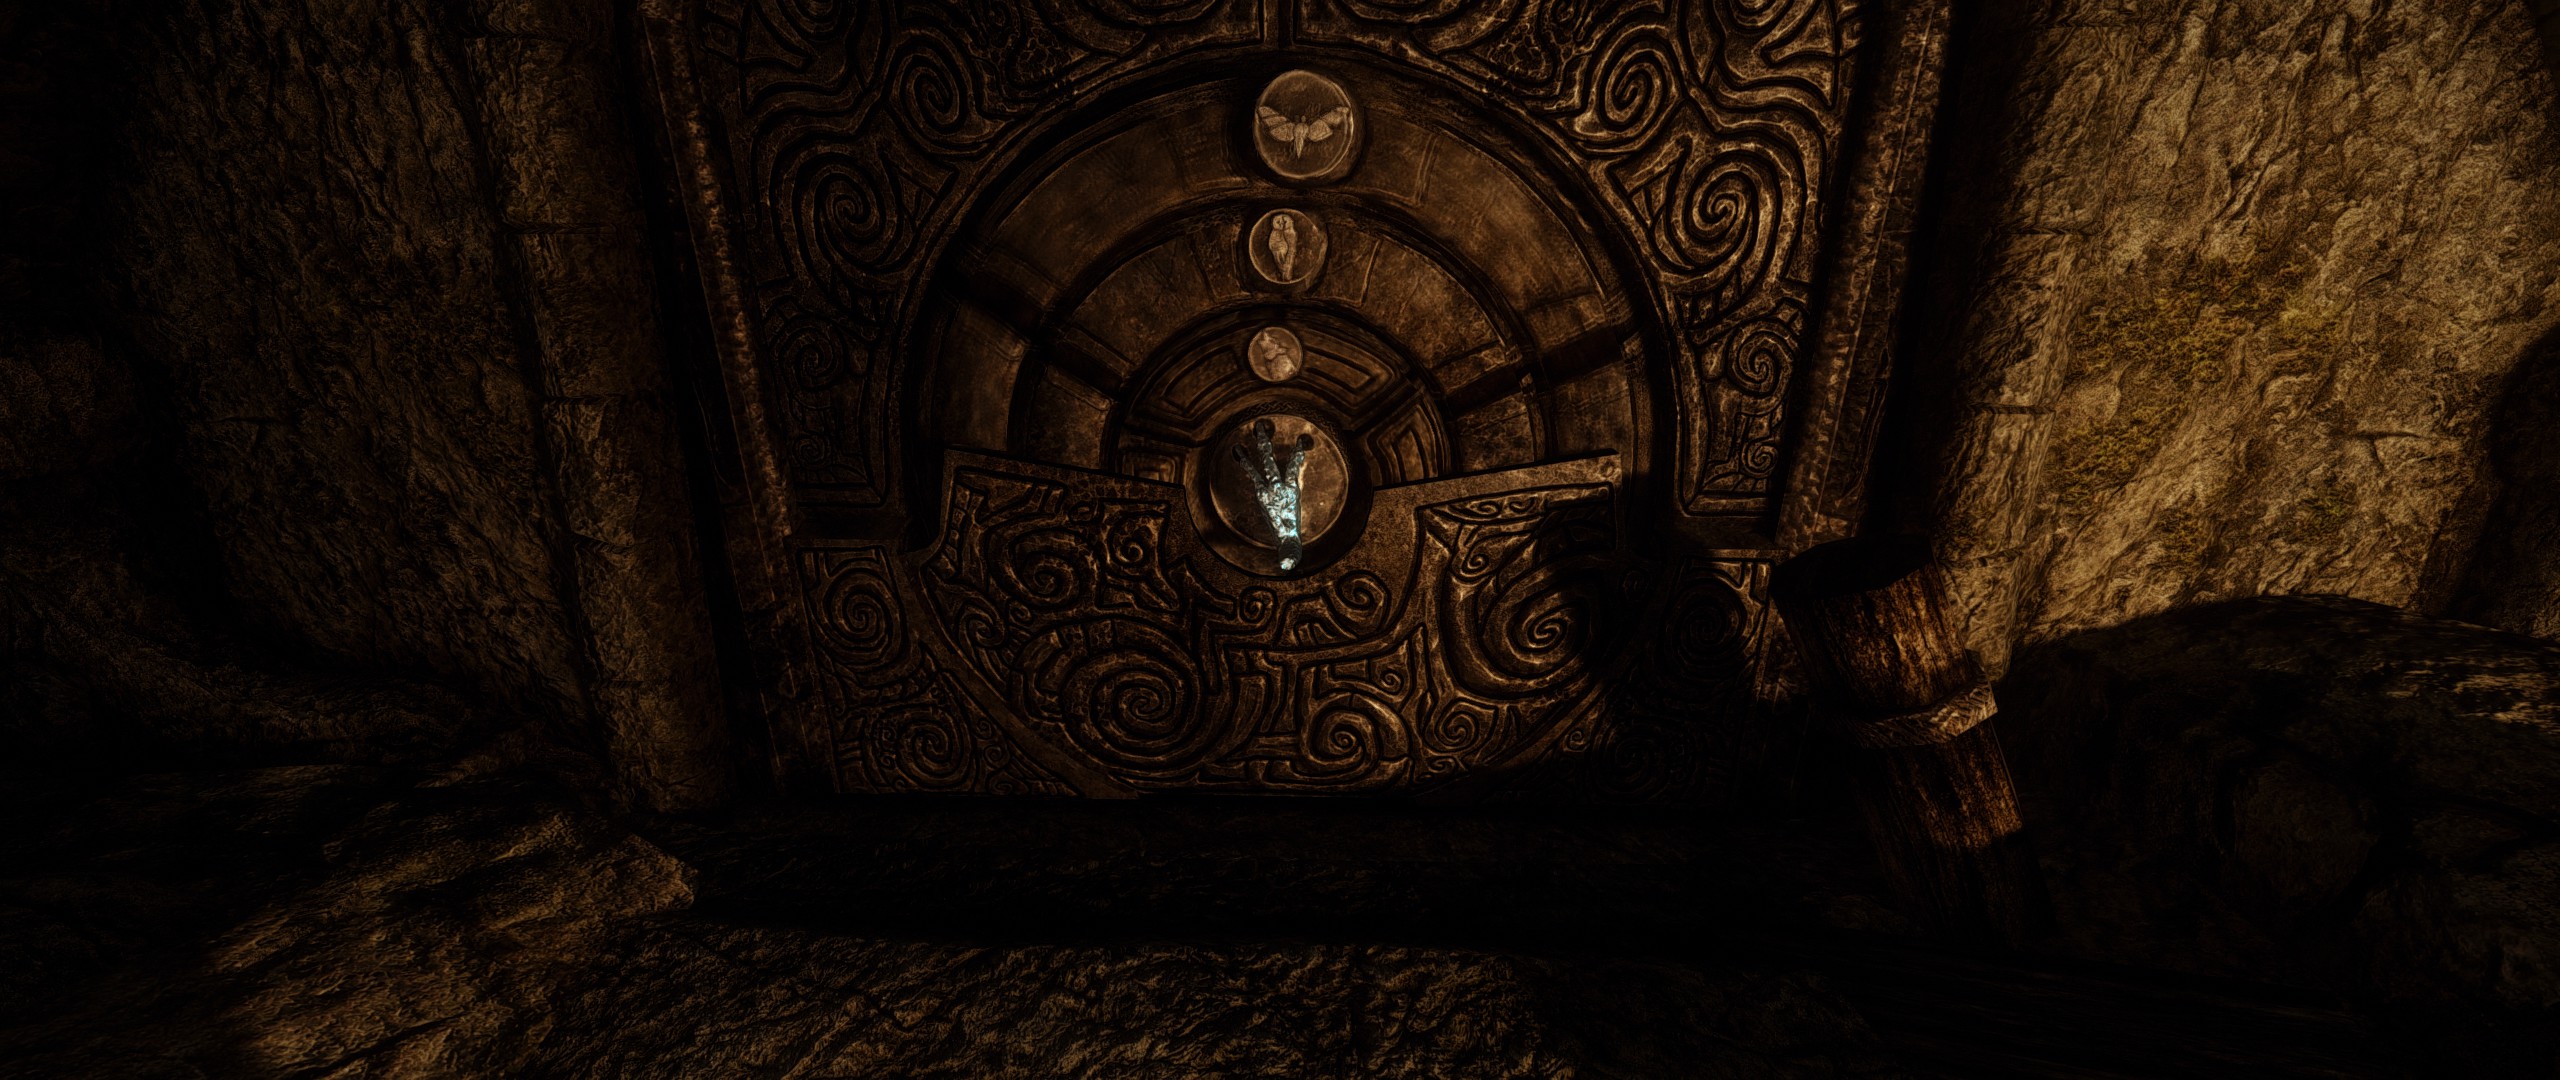 The Elder Scrolls - Page 23 ?interpolation=lanczos-none&output-format=jpeg&output-quality=95&fit=inside|2048:864&composite-to=*,*|2048:864&background-color=black